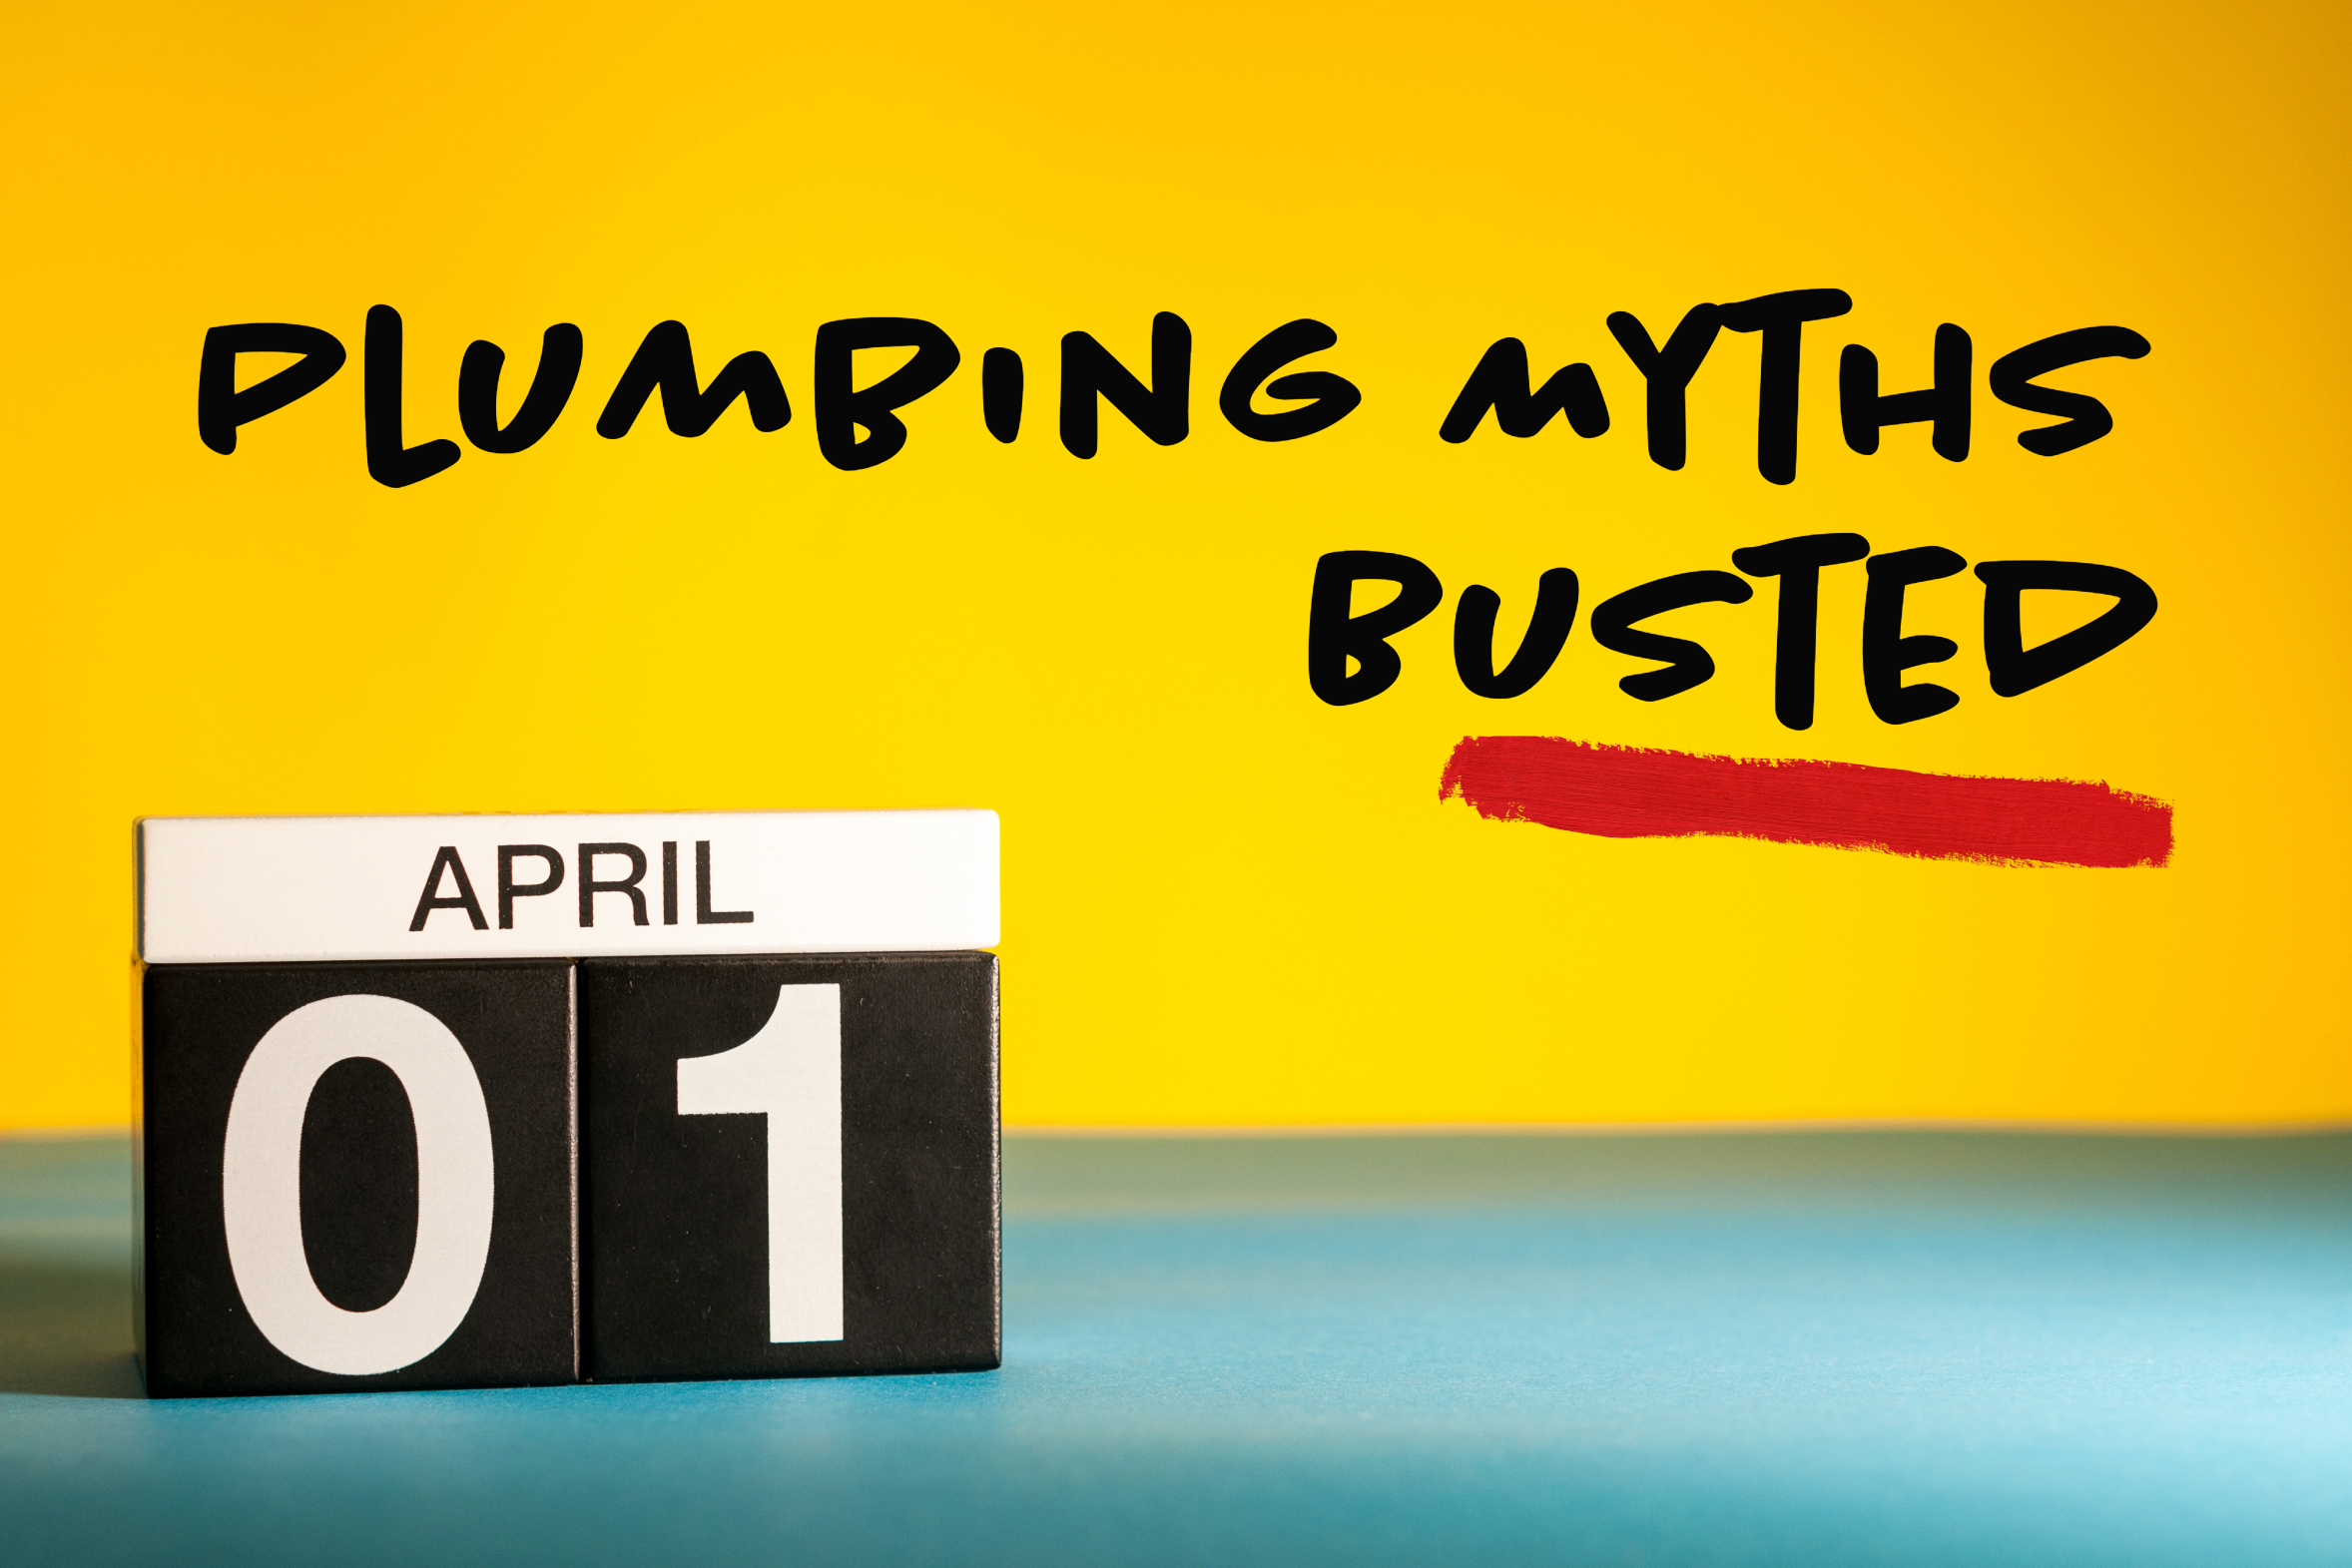 Plumbing myths that are not true.